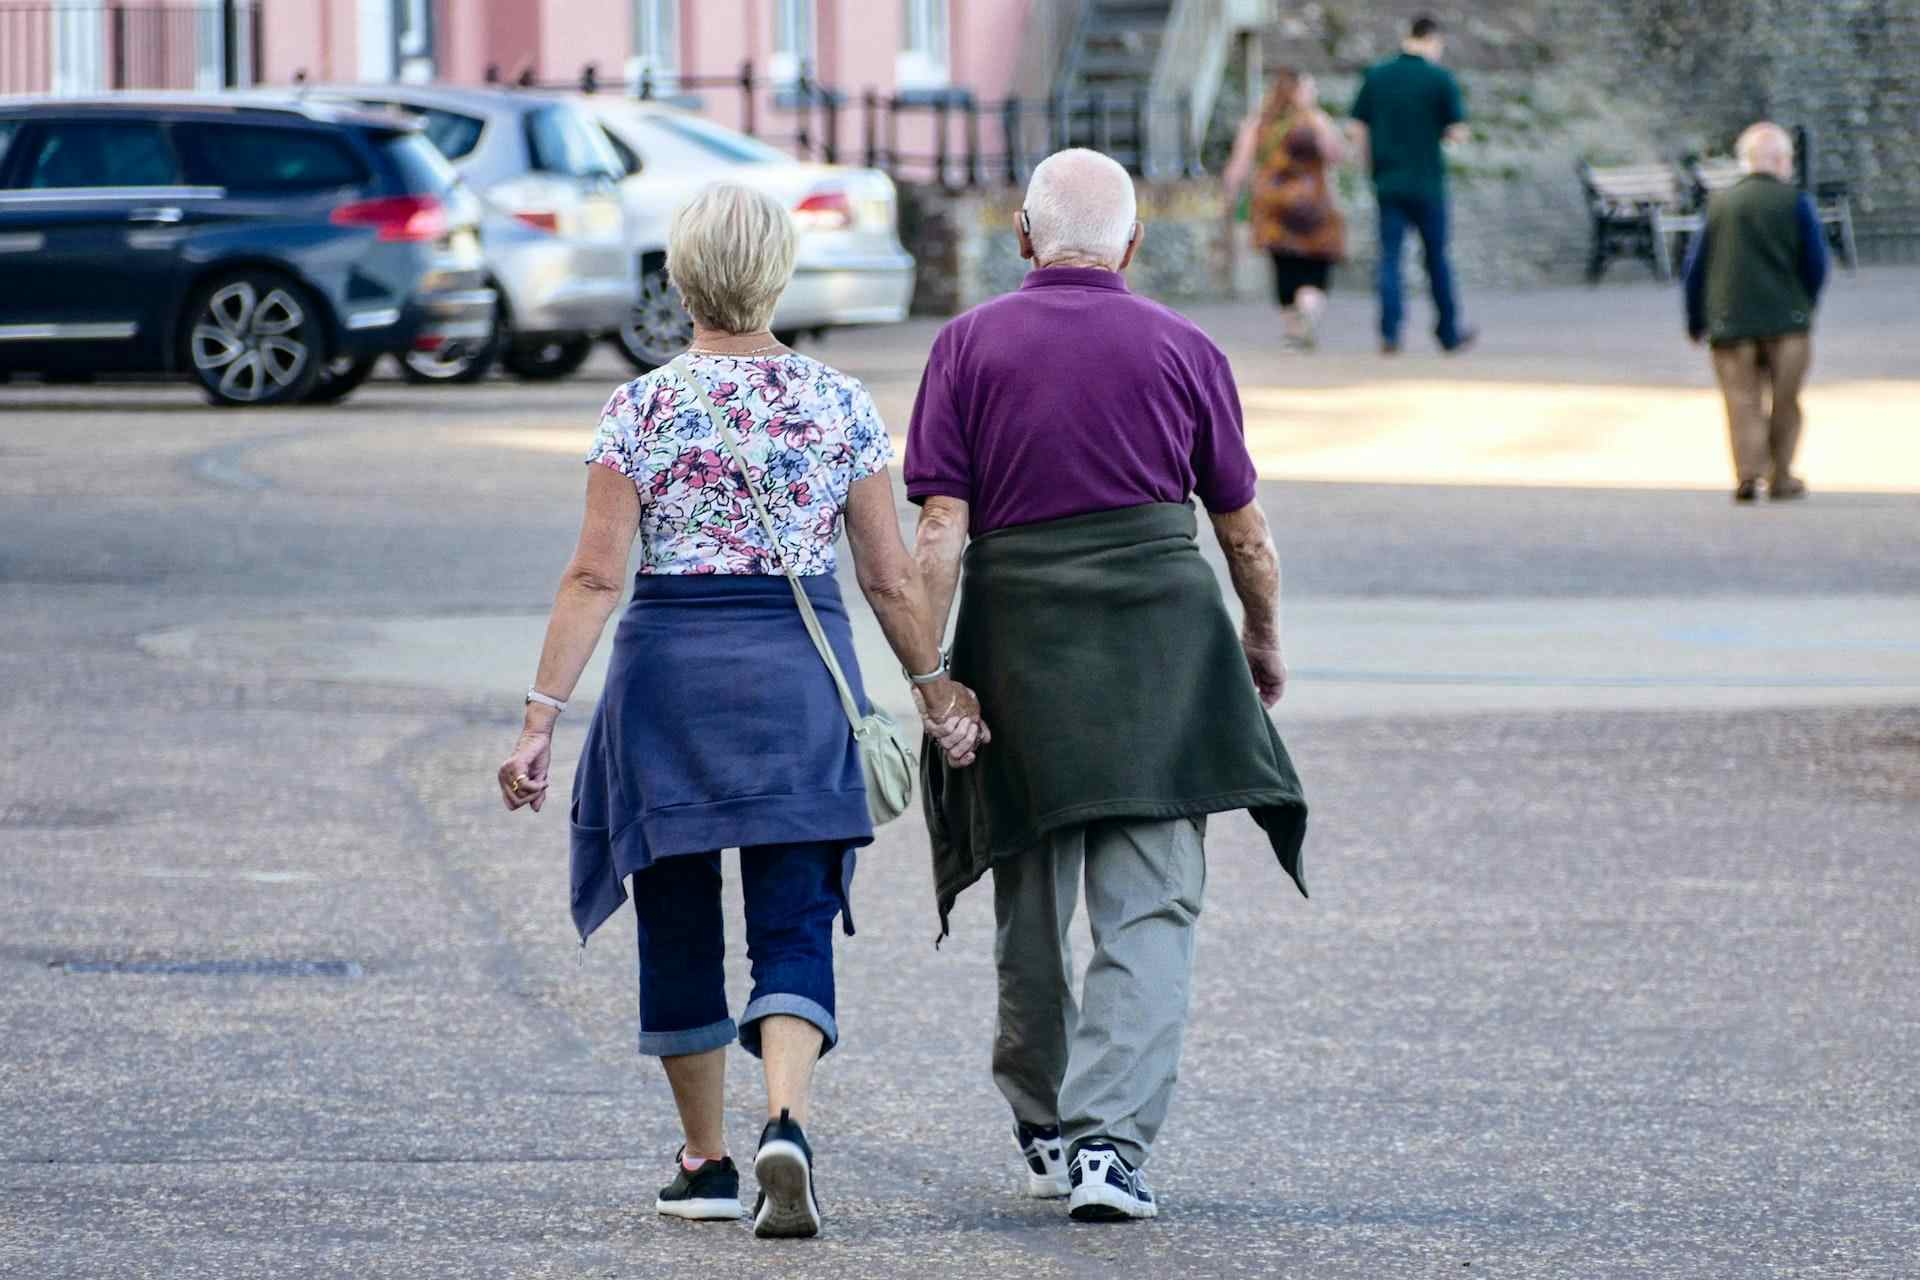 Over 60s dating: taking the plunge